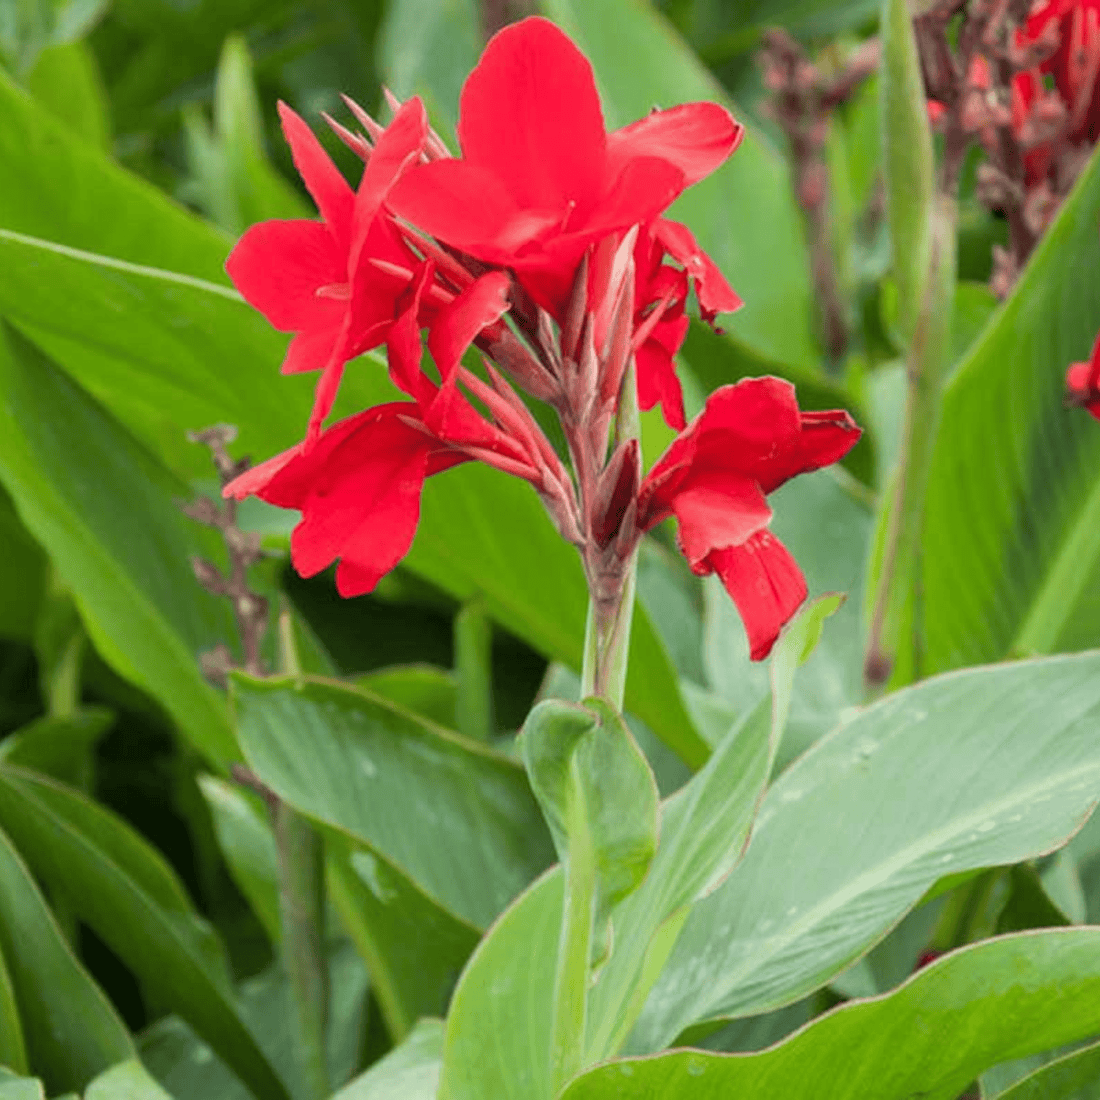 Red Canna Lily / Indian Shot (Canna indica) Flowering Live Plant